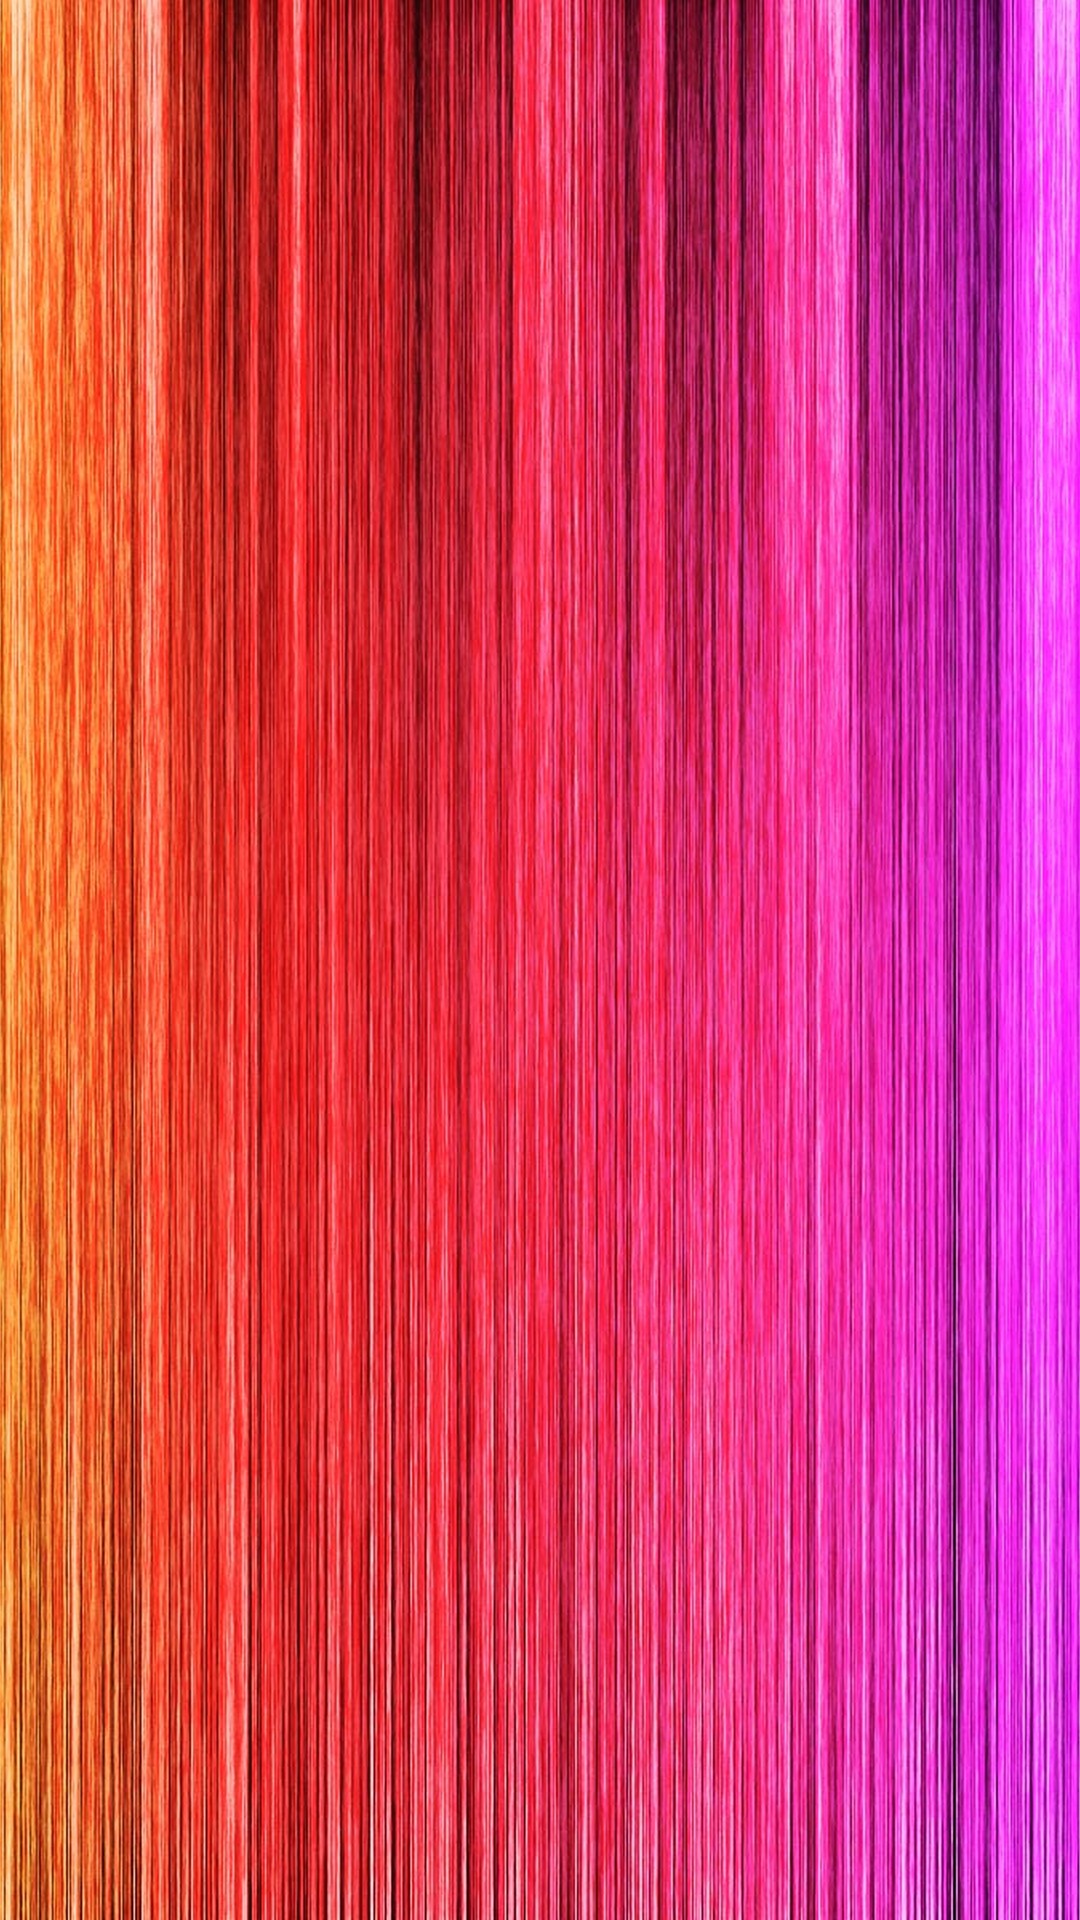 Wallpaper Rainbow Android with image resolution 1080x1920 pixel. You can make this wallpaper for your Android backgrounds, Tablet, Smartphones Screensavers and Mobile Phone Lock Screen